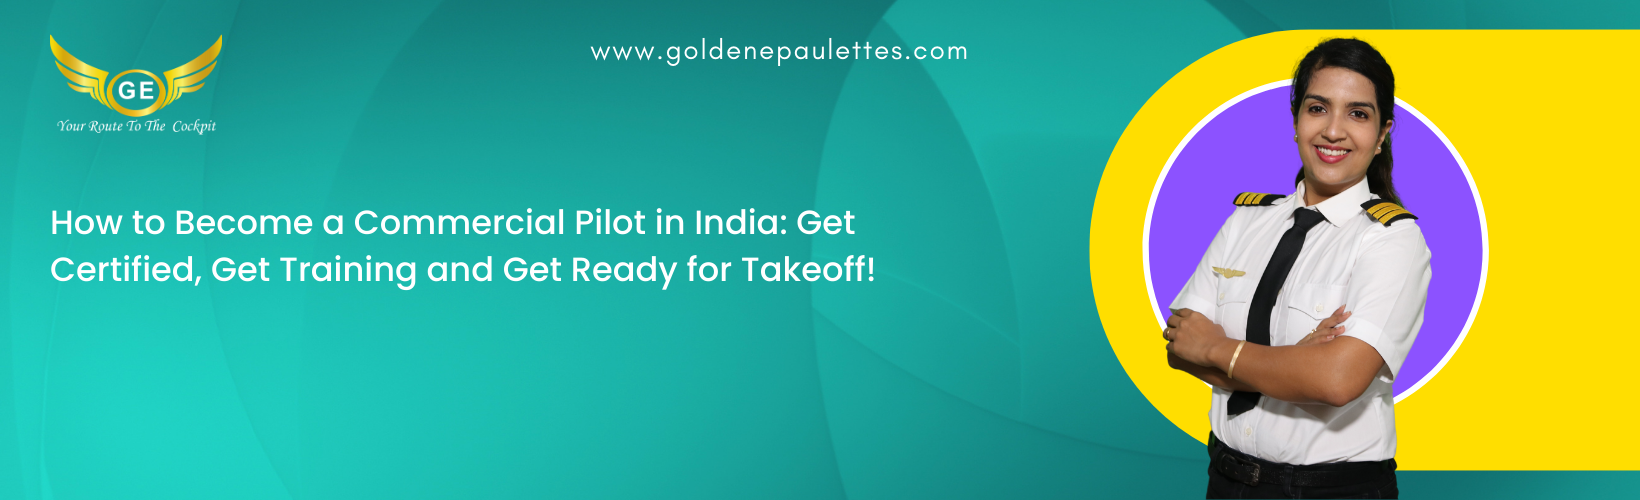 How to Become a Commercial Pilot in India